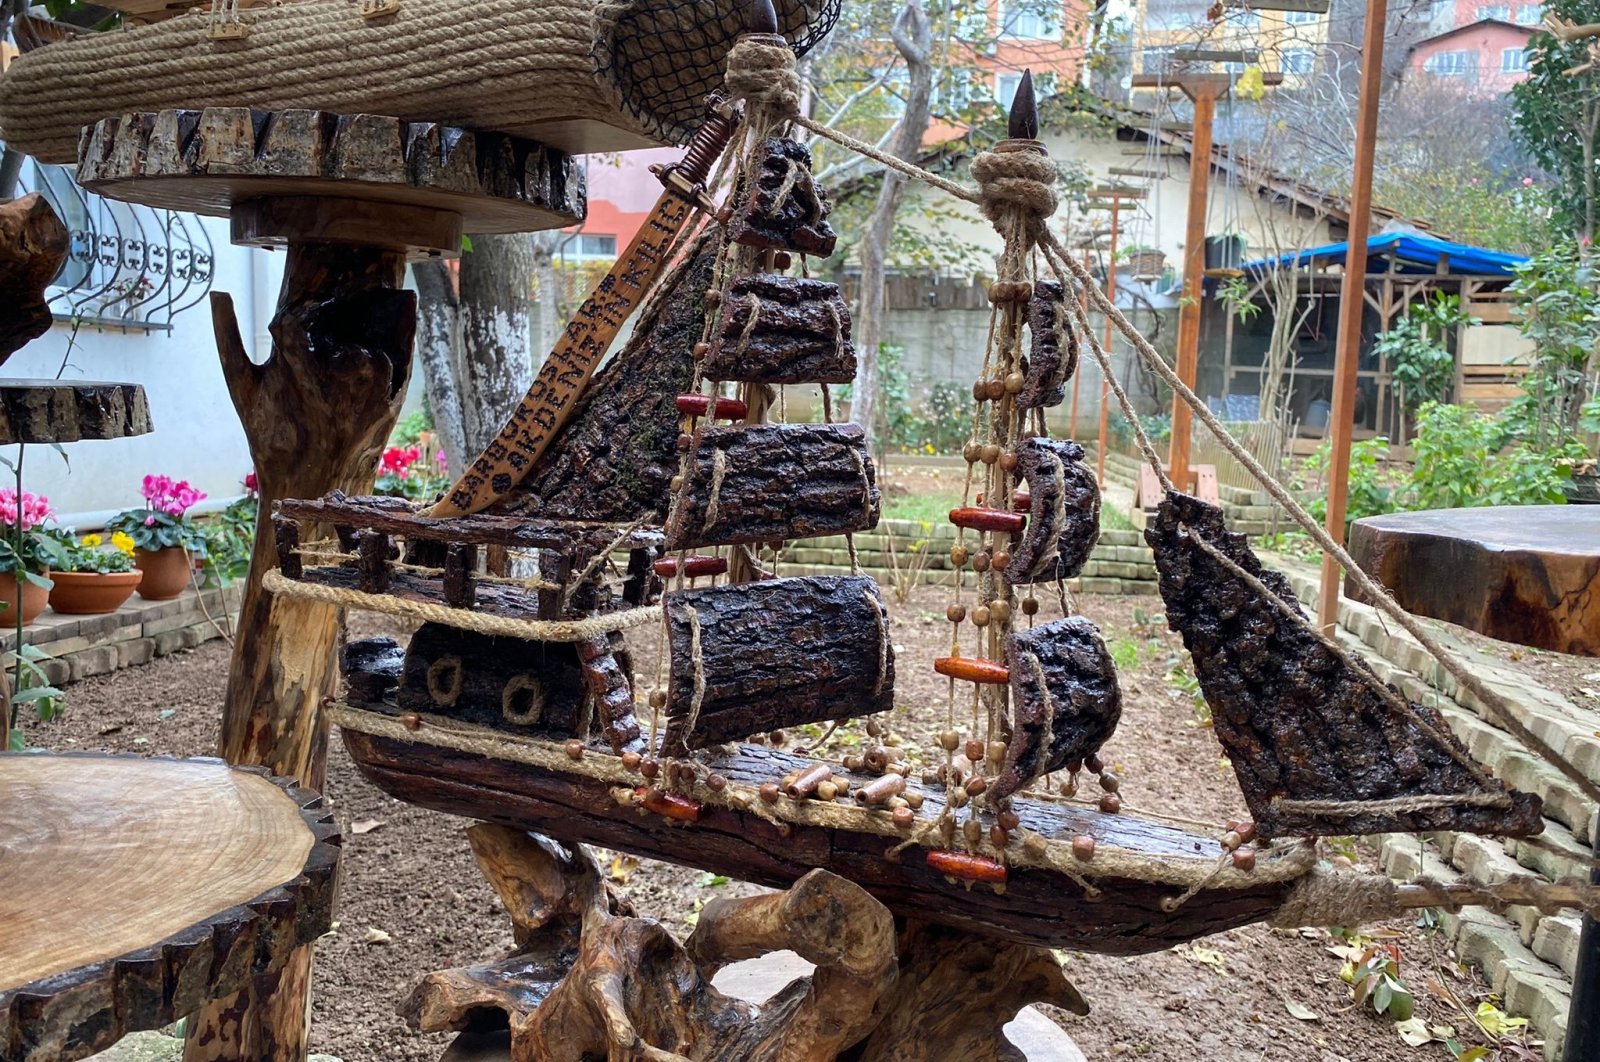 A wooden model of an old-style sailing ship made from rotten trees, Istanbul, Turkey, Dec. 12, 2021. (IHA Photo)